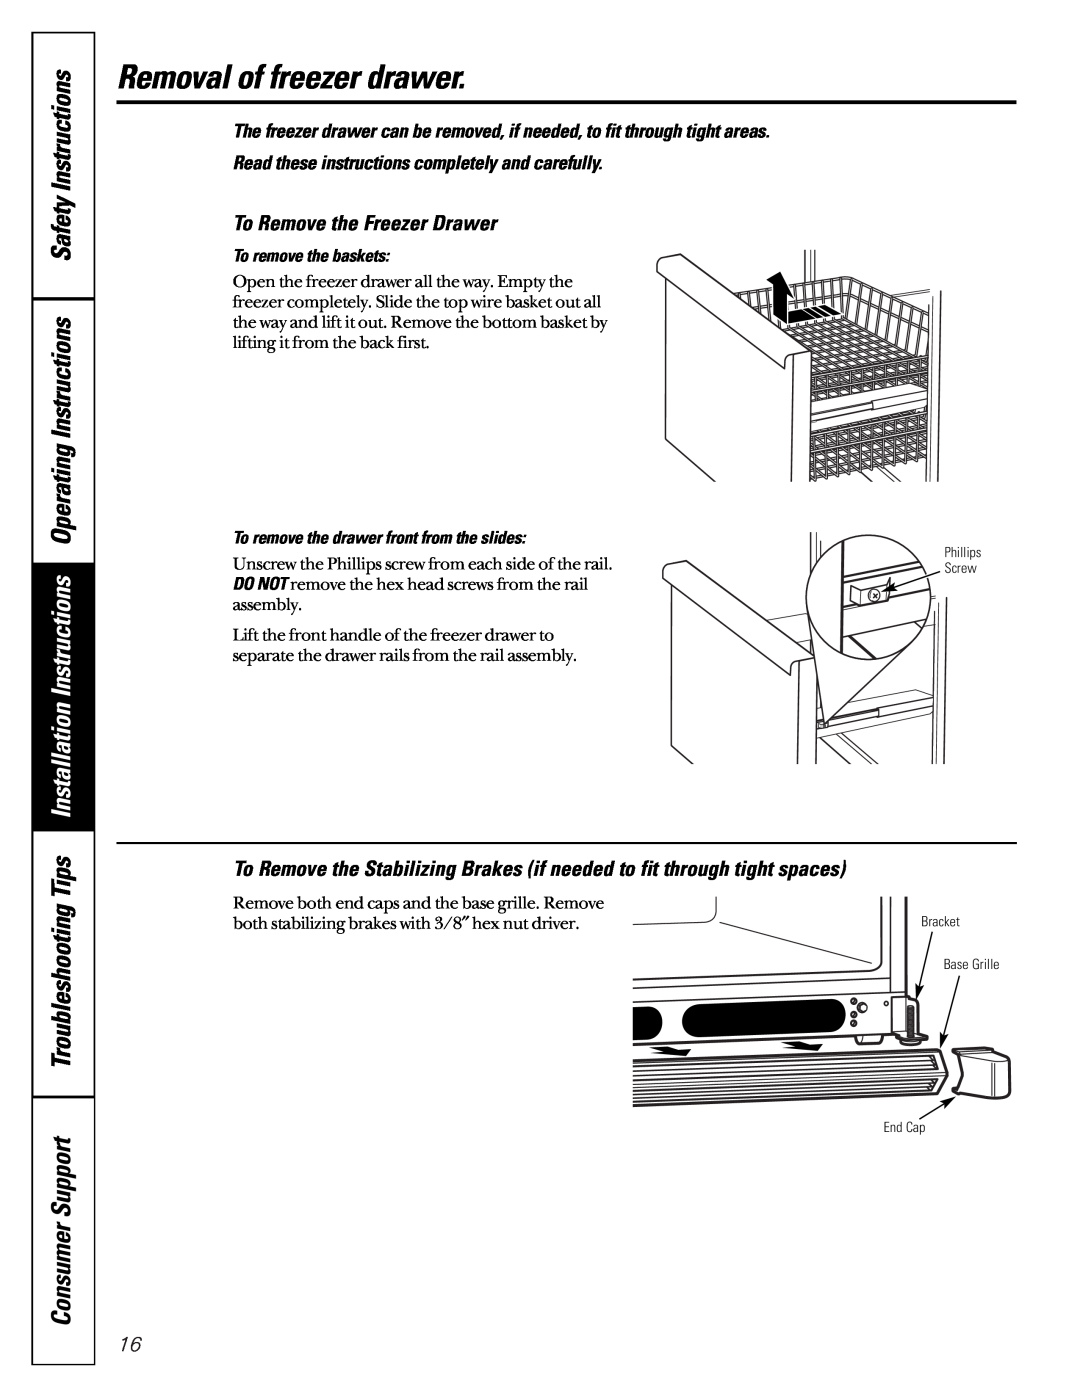 GE Model 21 Removal of freezer drawer, To Remove the Freezer Drawer, Read these instructions completely and carefully 